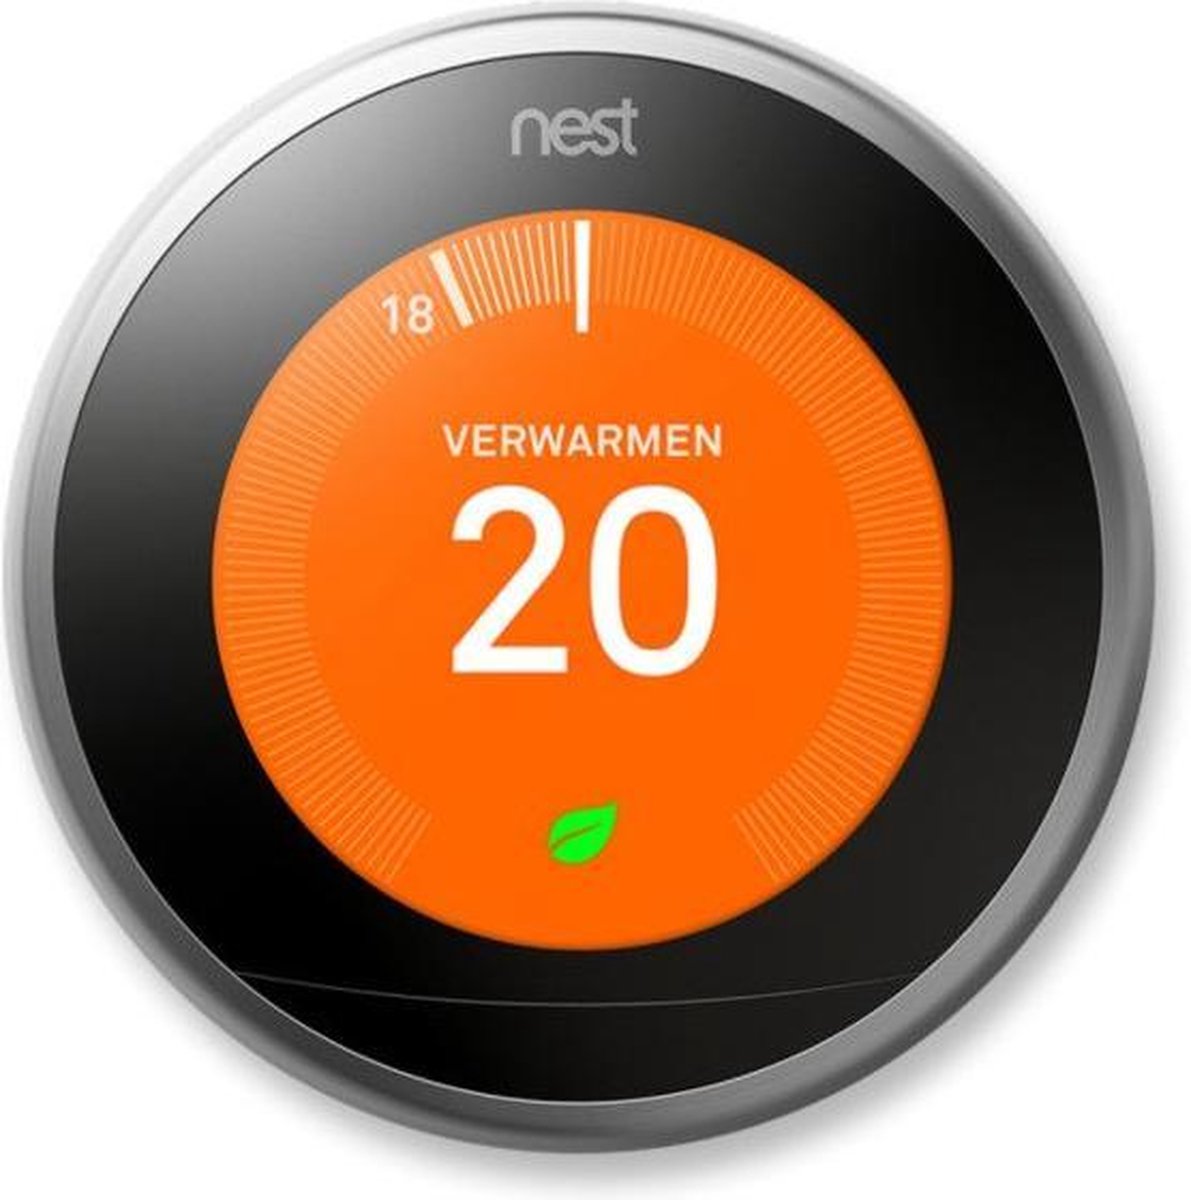 Google Nest Learning Thermostat - Slimme thermostaat - RVS | bol.com